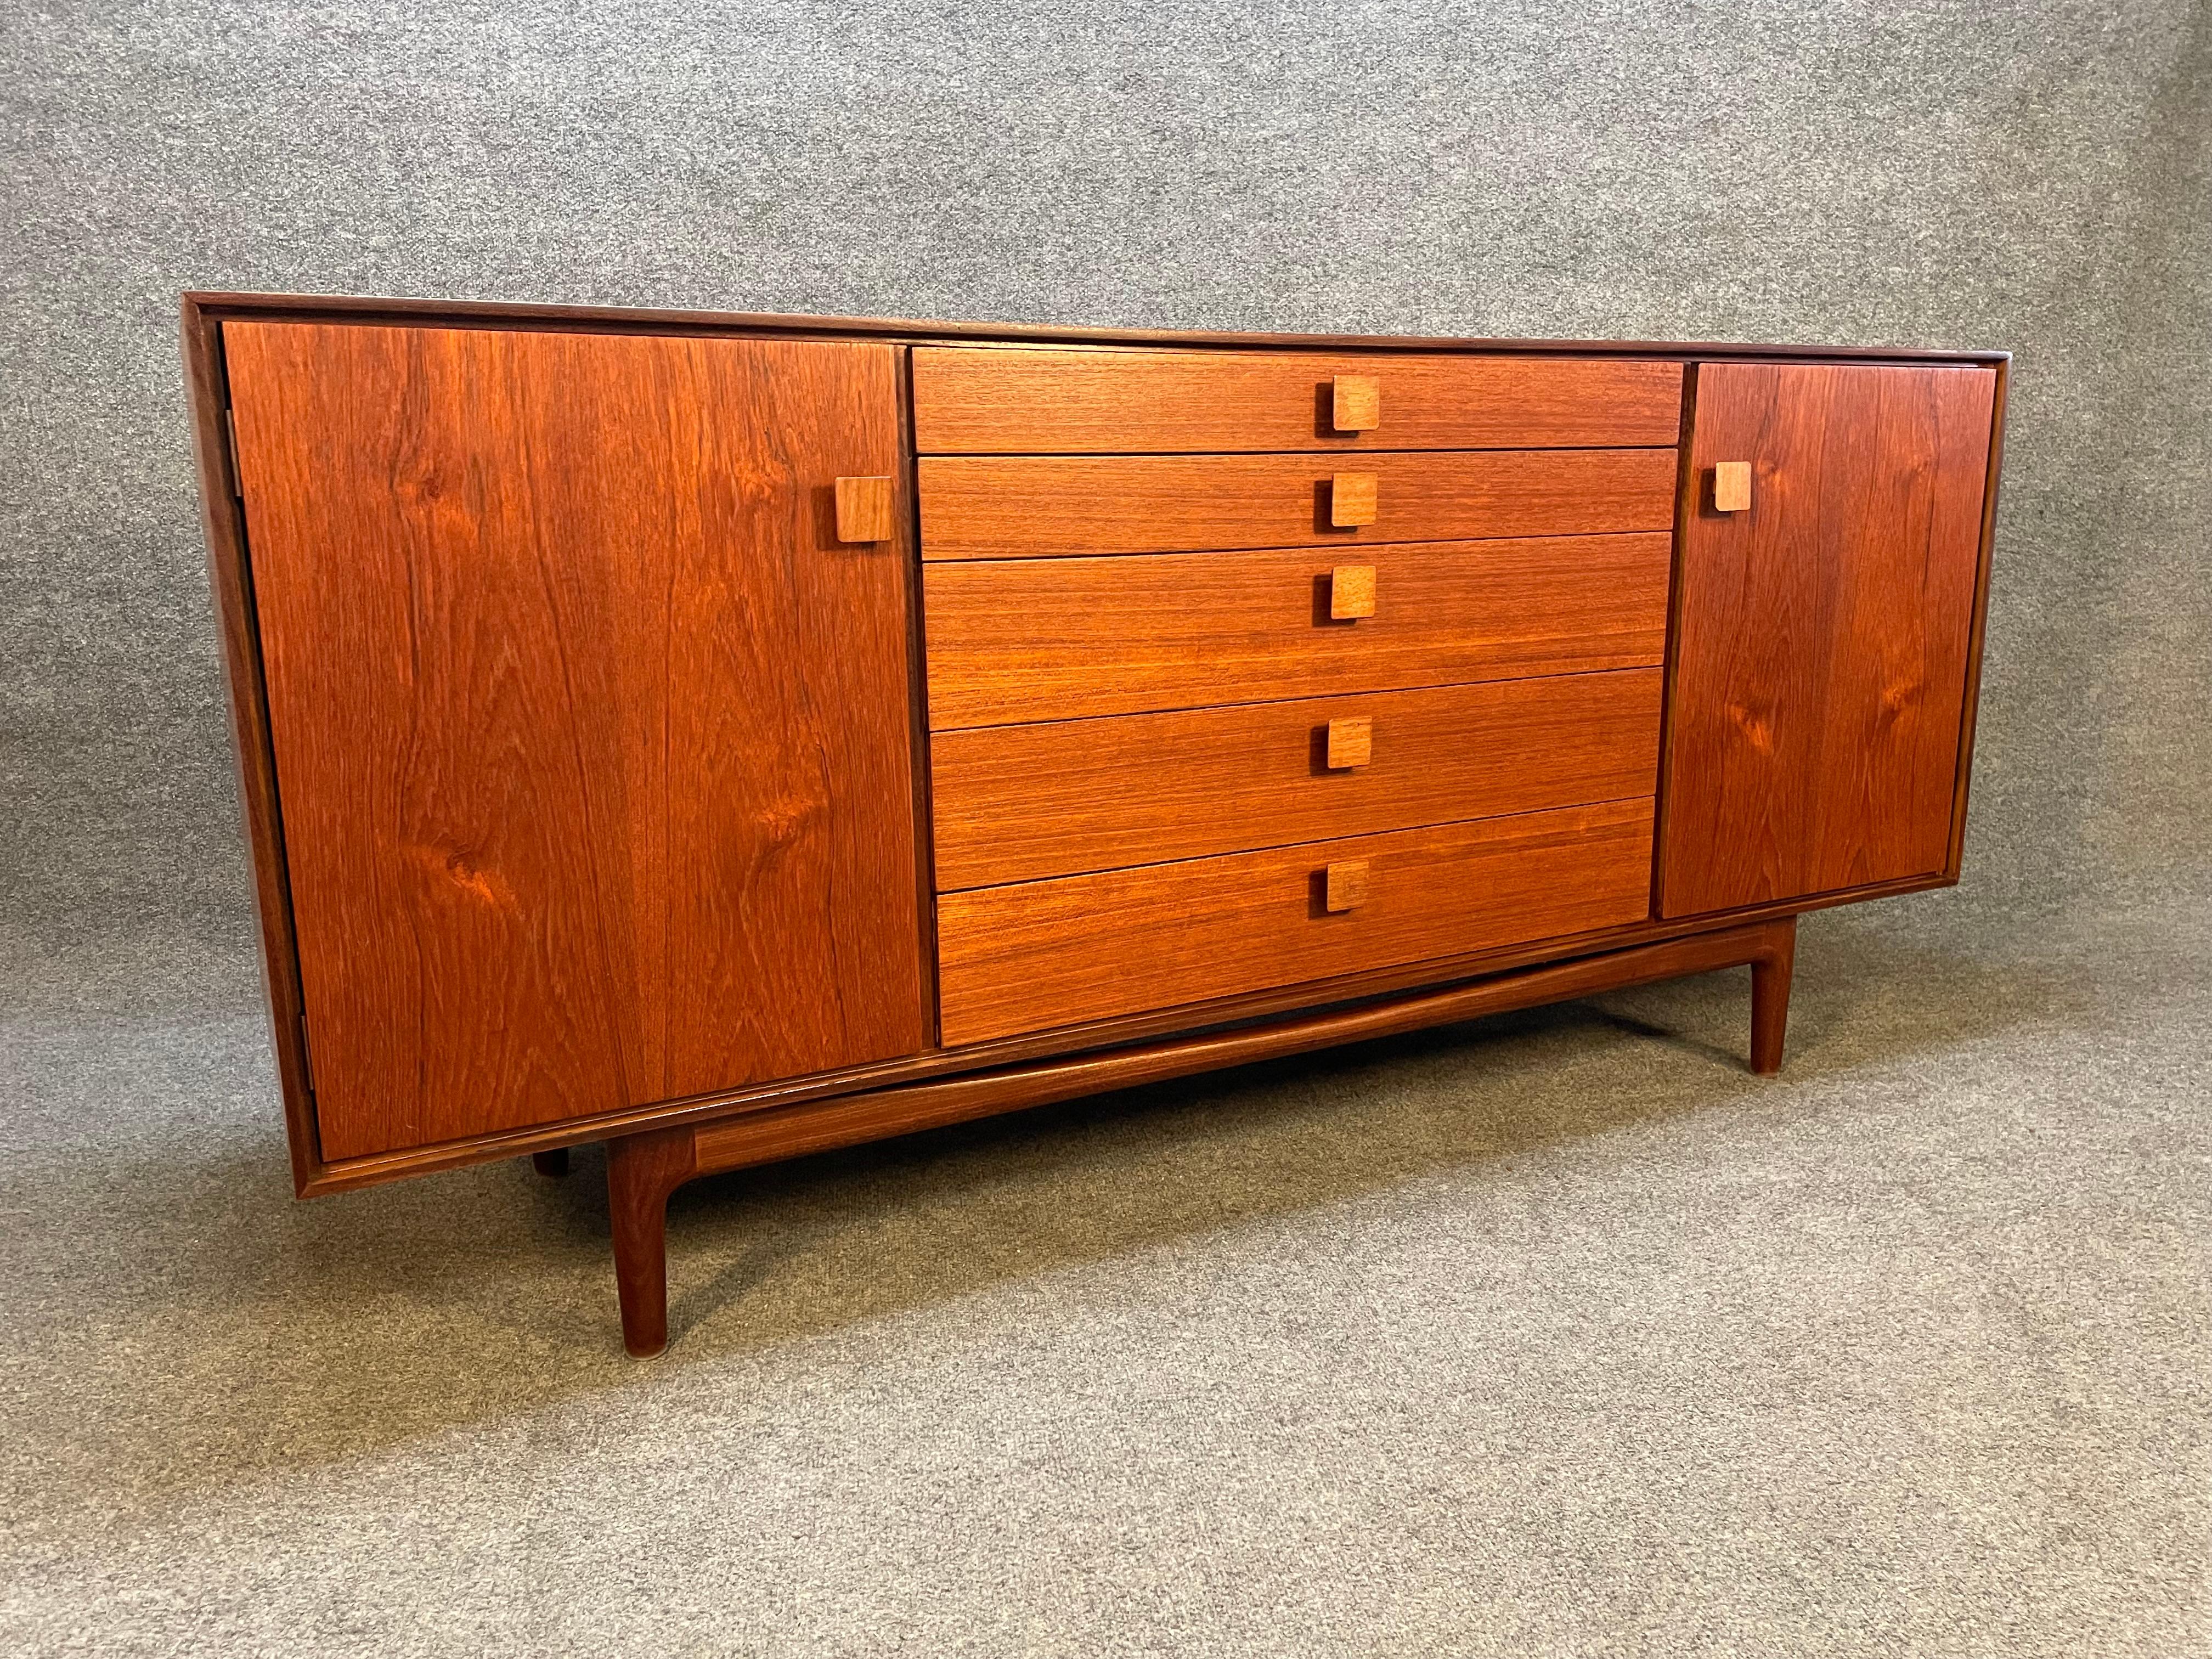 Vintage Danish Mid-Century Modern Teak Compact Credenza by Kofod Larsen for G Pl In Good Condition For Sale In San Marcos, CA